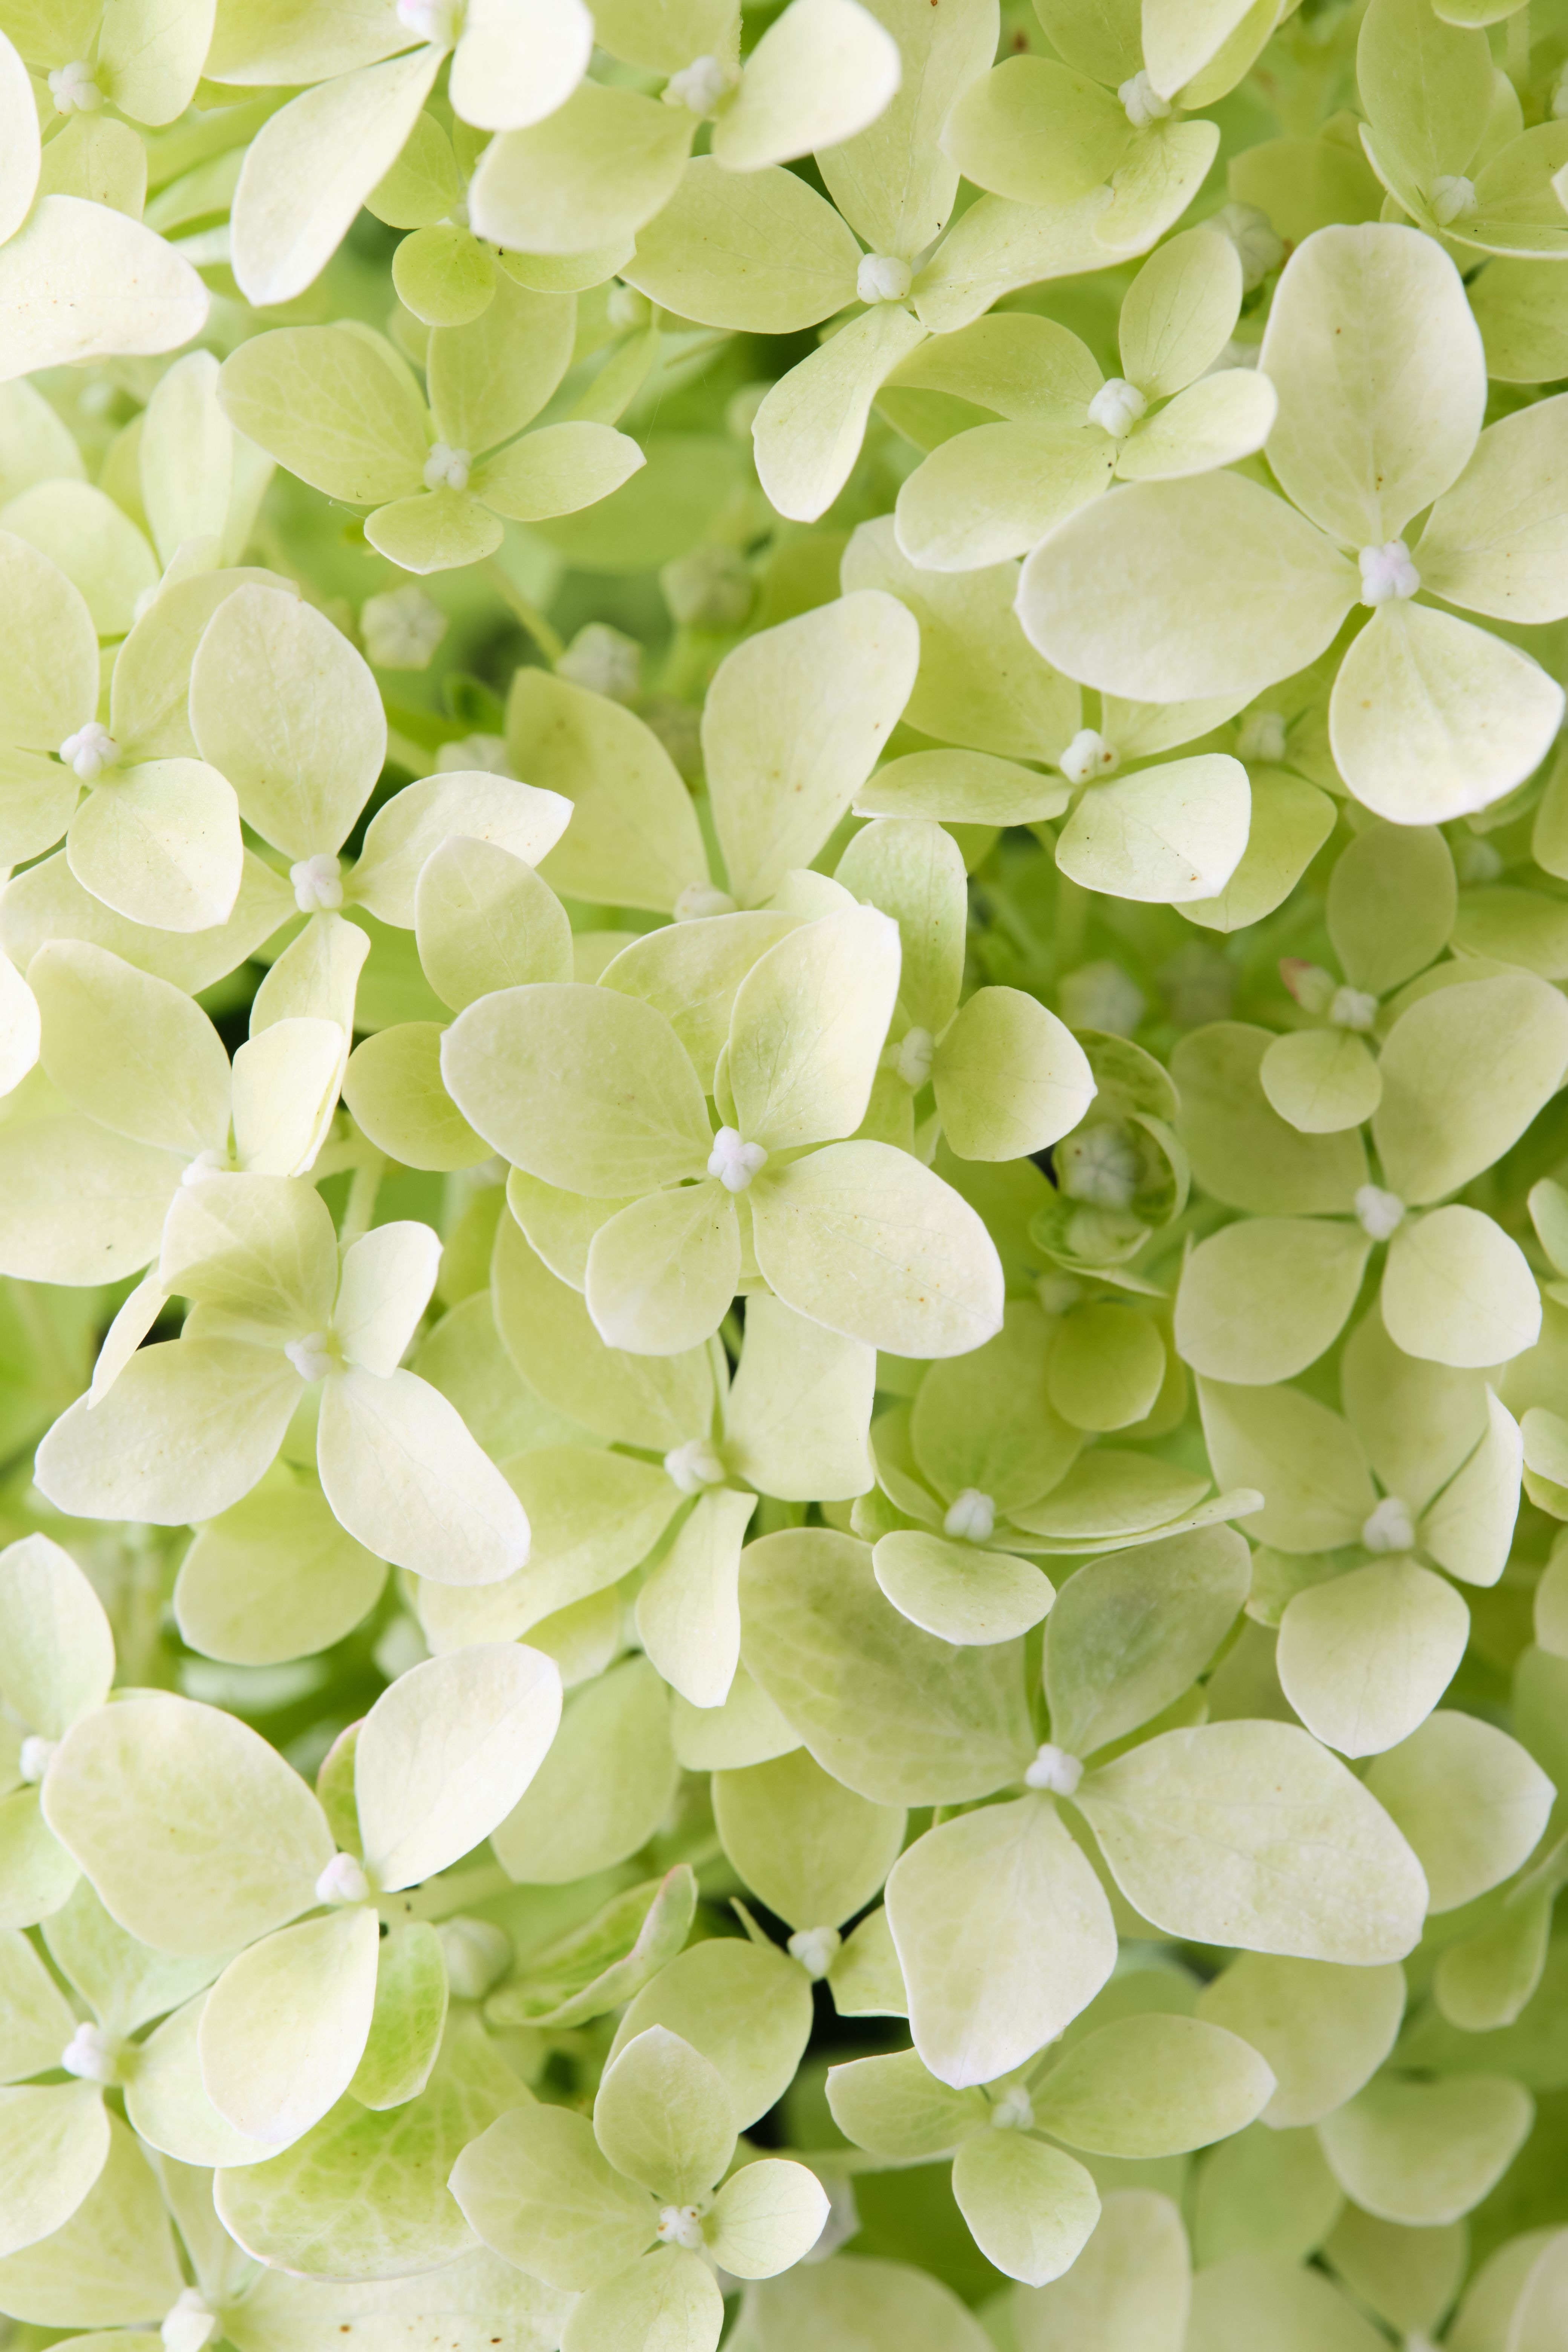 images/plants/hydrangea/hyd-magical-lime-sparkle/hyd-pan-magical-lime-sparkle-0001.jpg